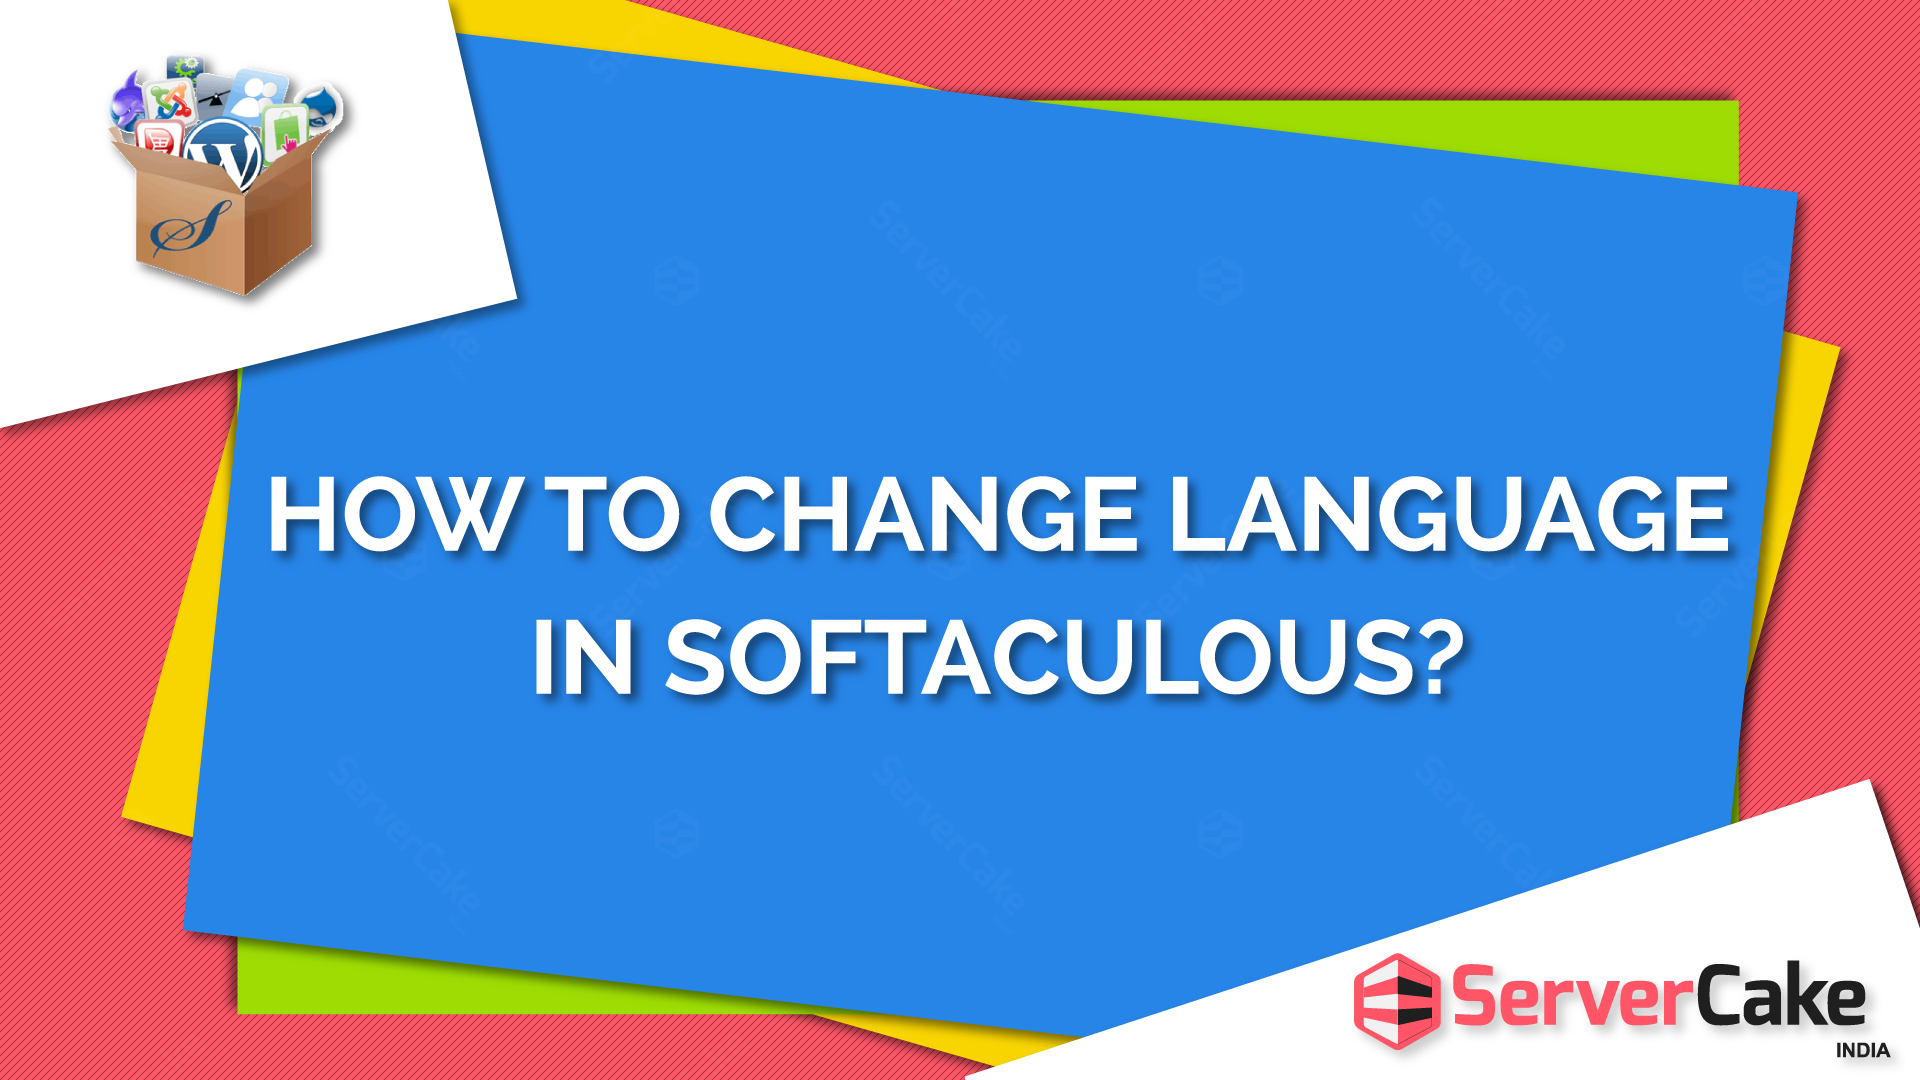 How to change language in Softaculous?